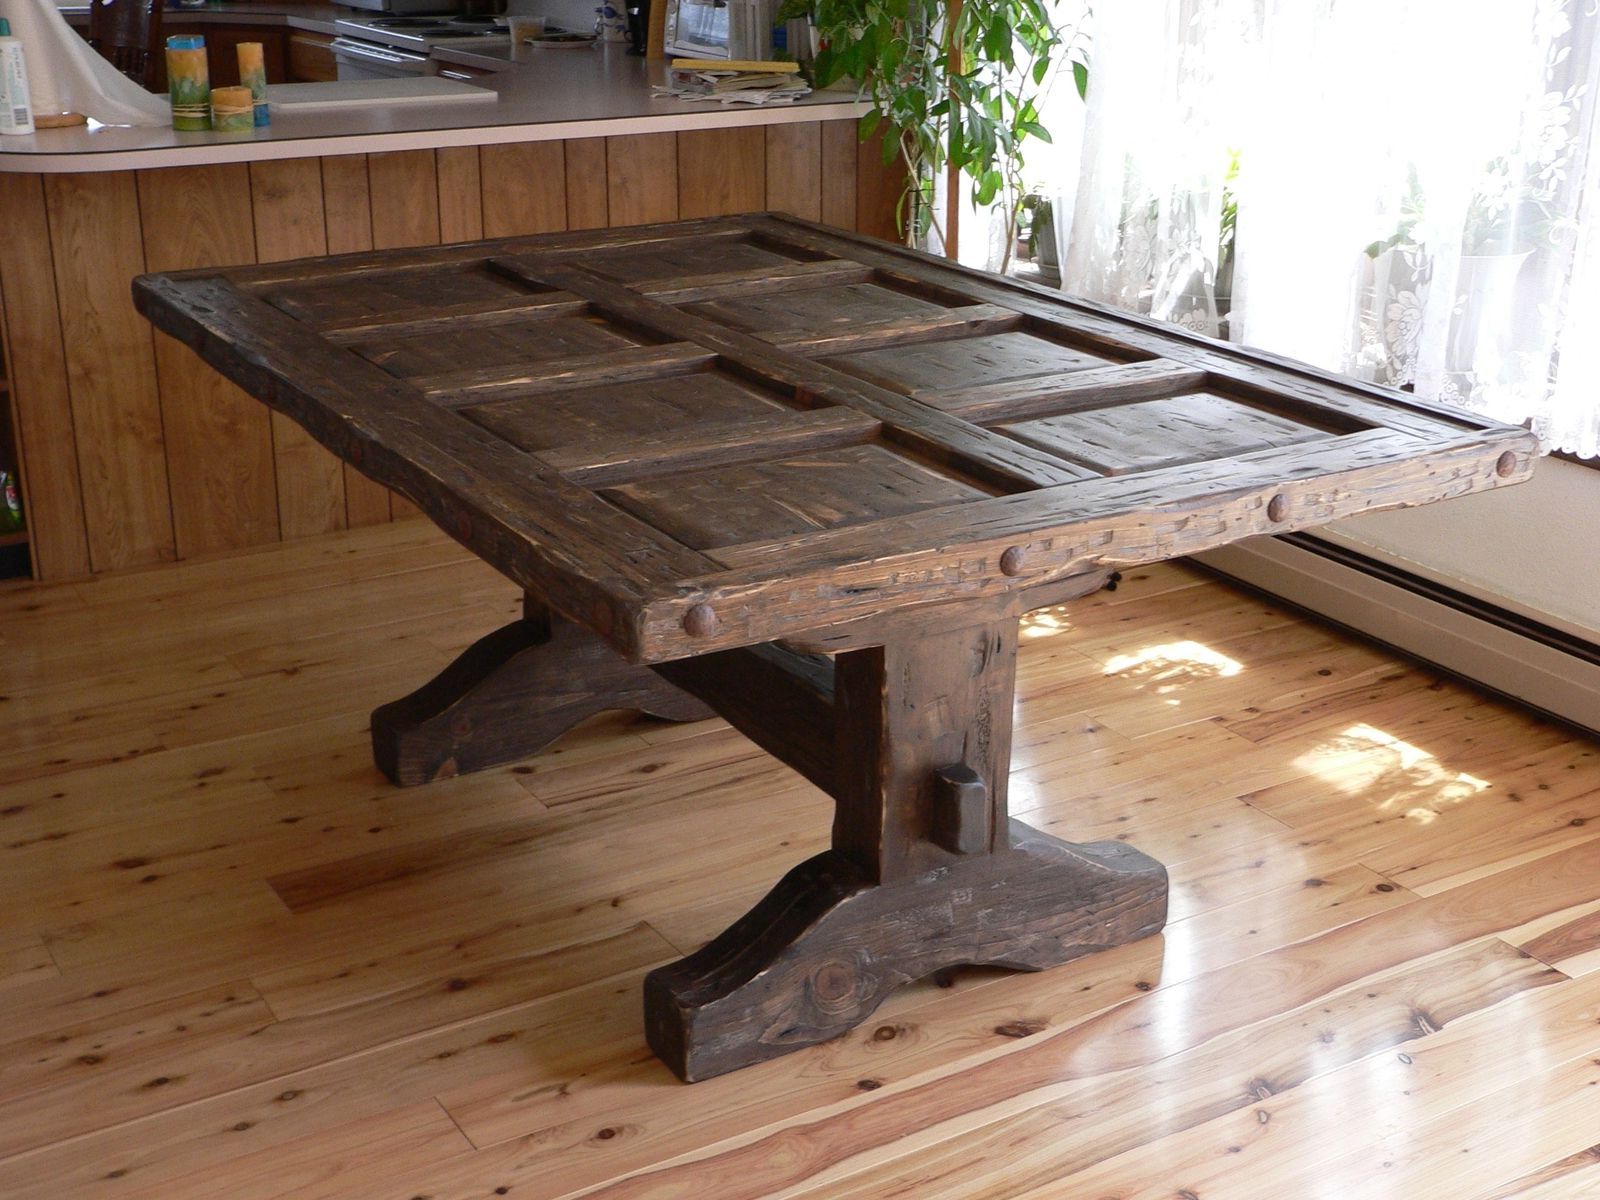 Custom Southwest Distressed Dining Room Table, With Glass Intended For Fashionable Rustic Pine Small Dining Tables (View 5 of 25)